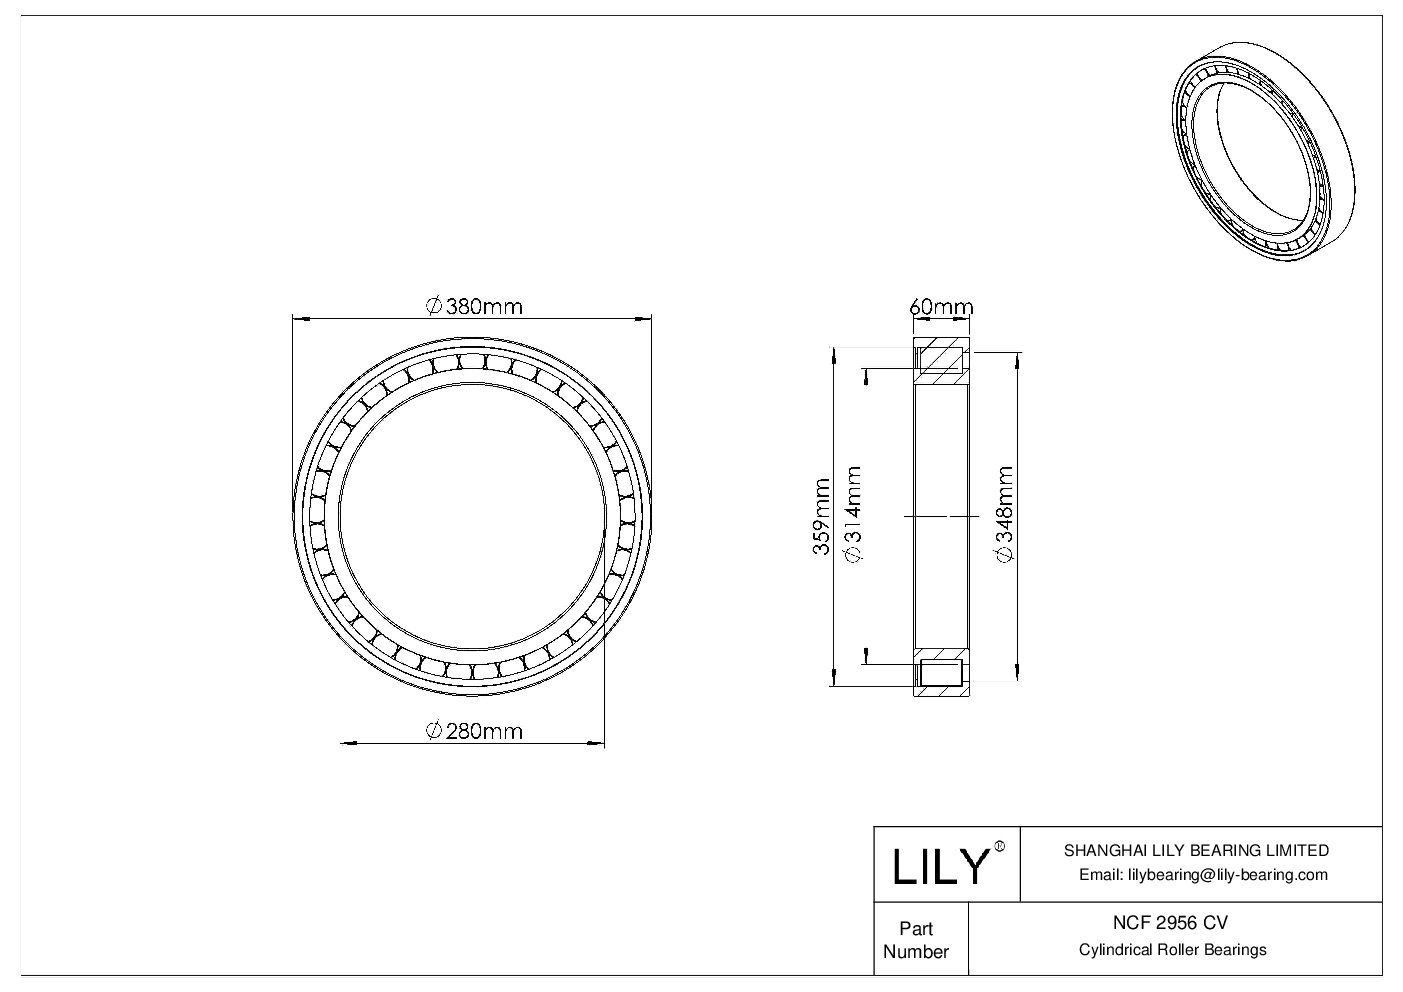 NCF 2956 CV Single Row Full Complement Cylindrical Roller Bearings cad drawing